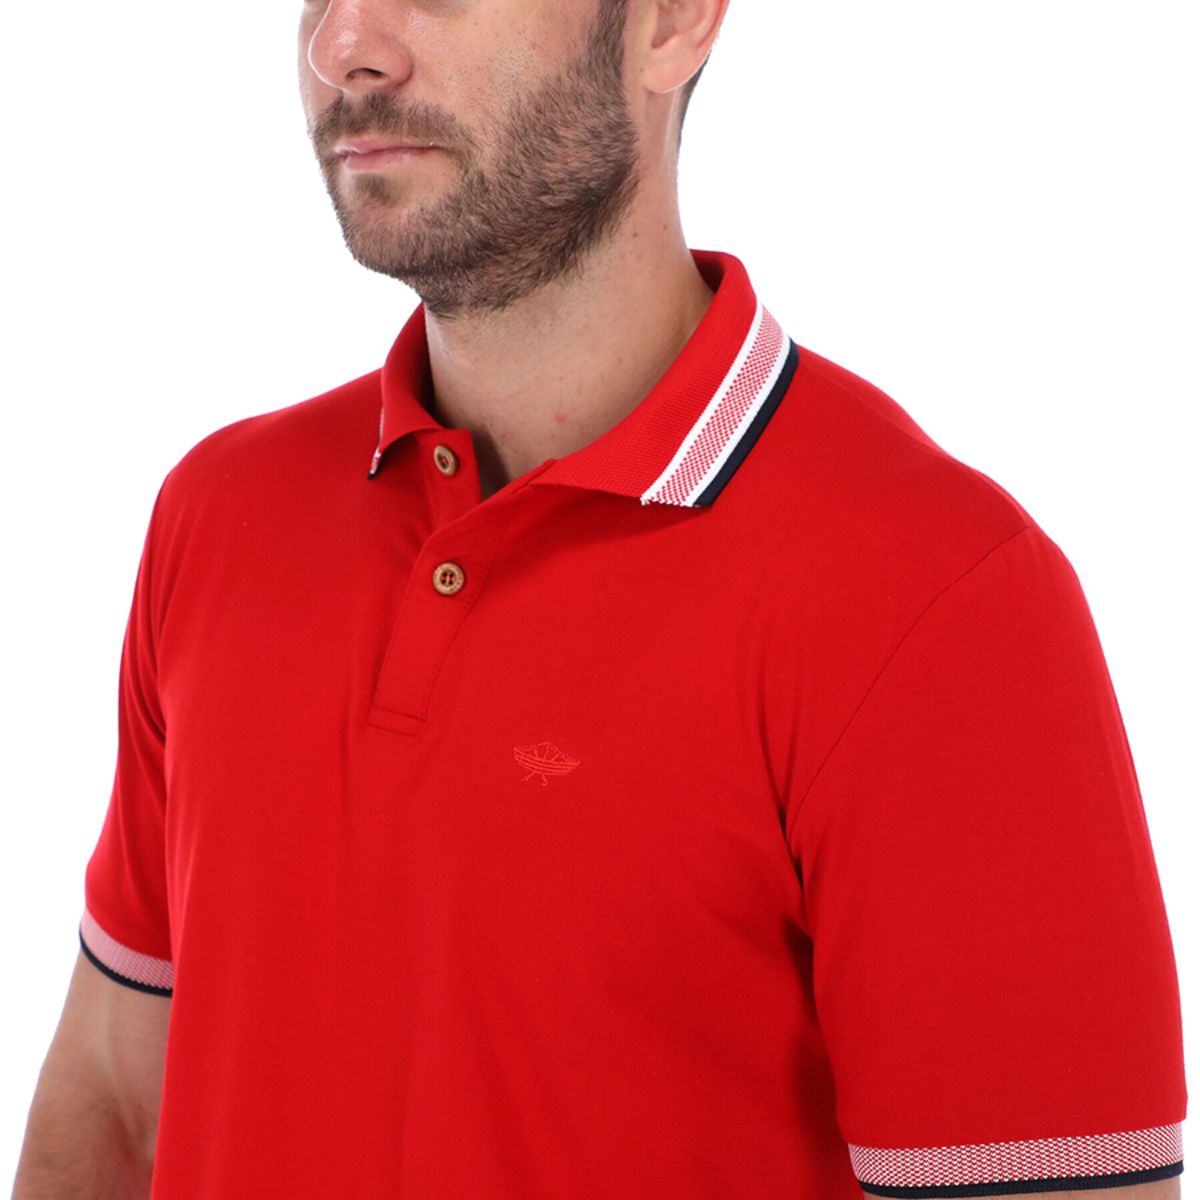 Men's Solid Short Sleeve Polo Polo Shirt Red & Black